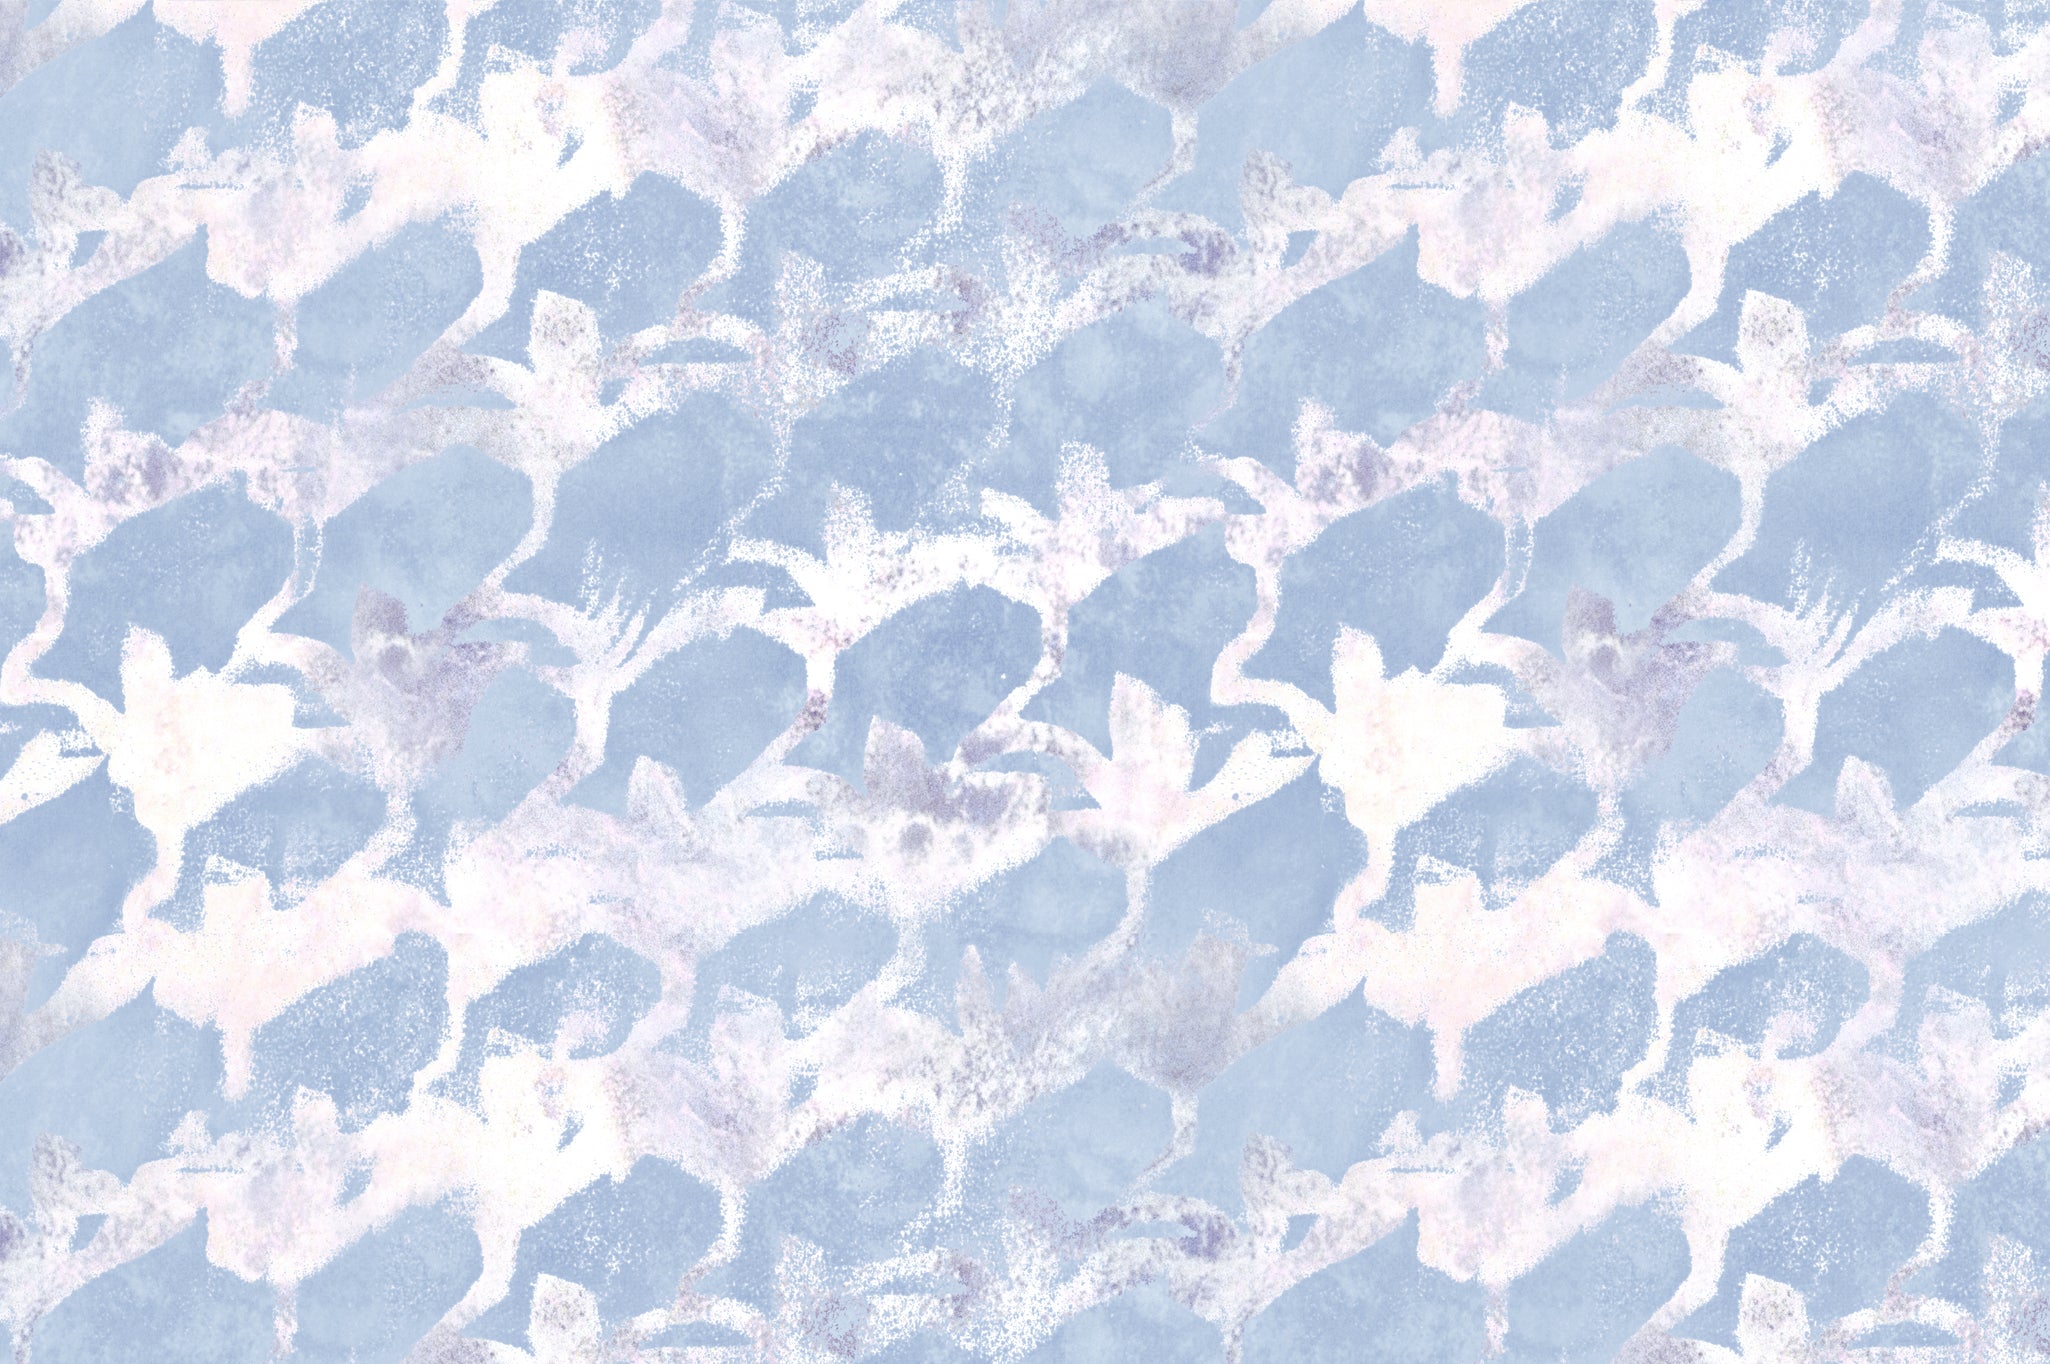 Detail of wallpaper in an abstract lotus print in mottled white and purple on a light blue field.